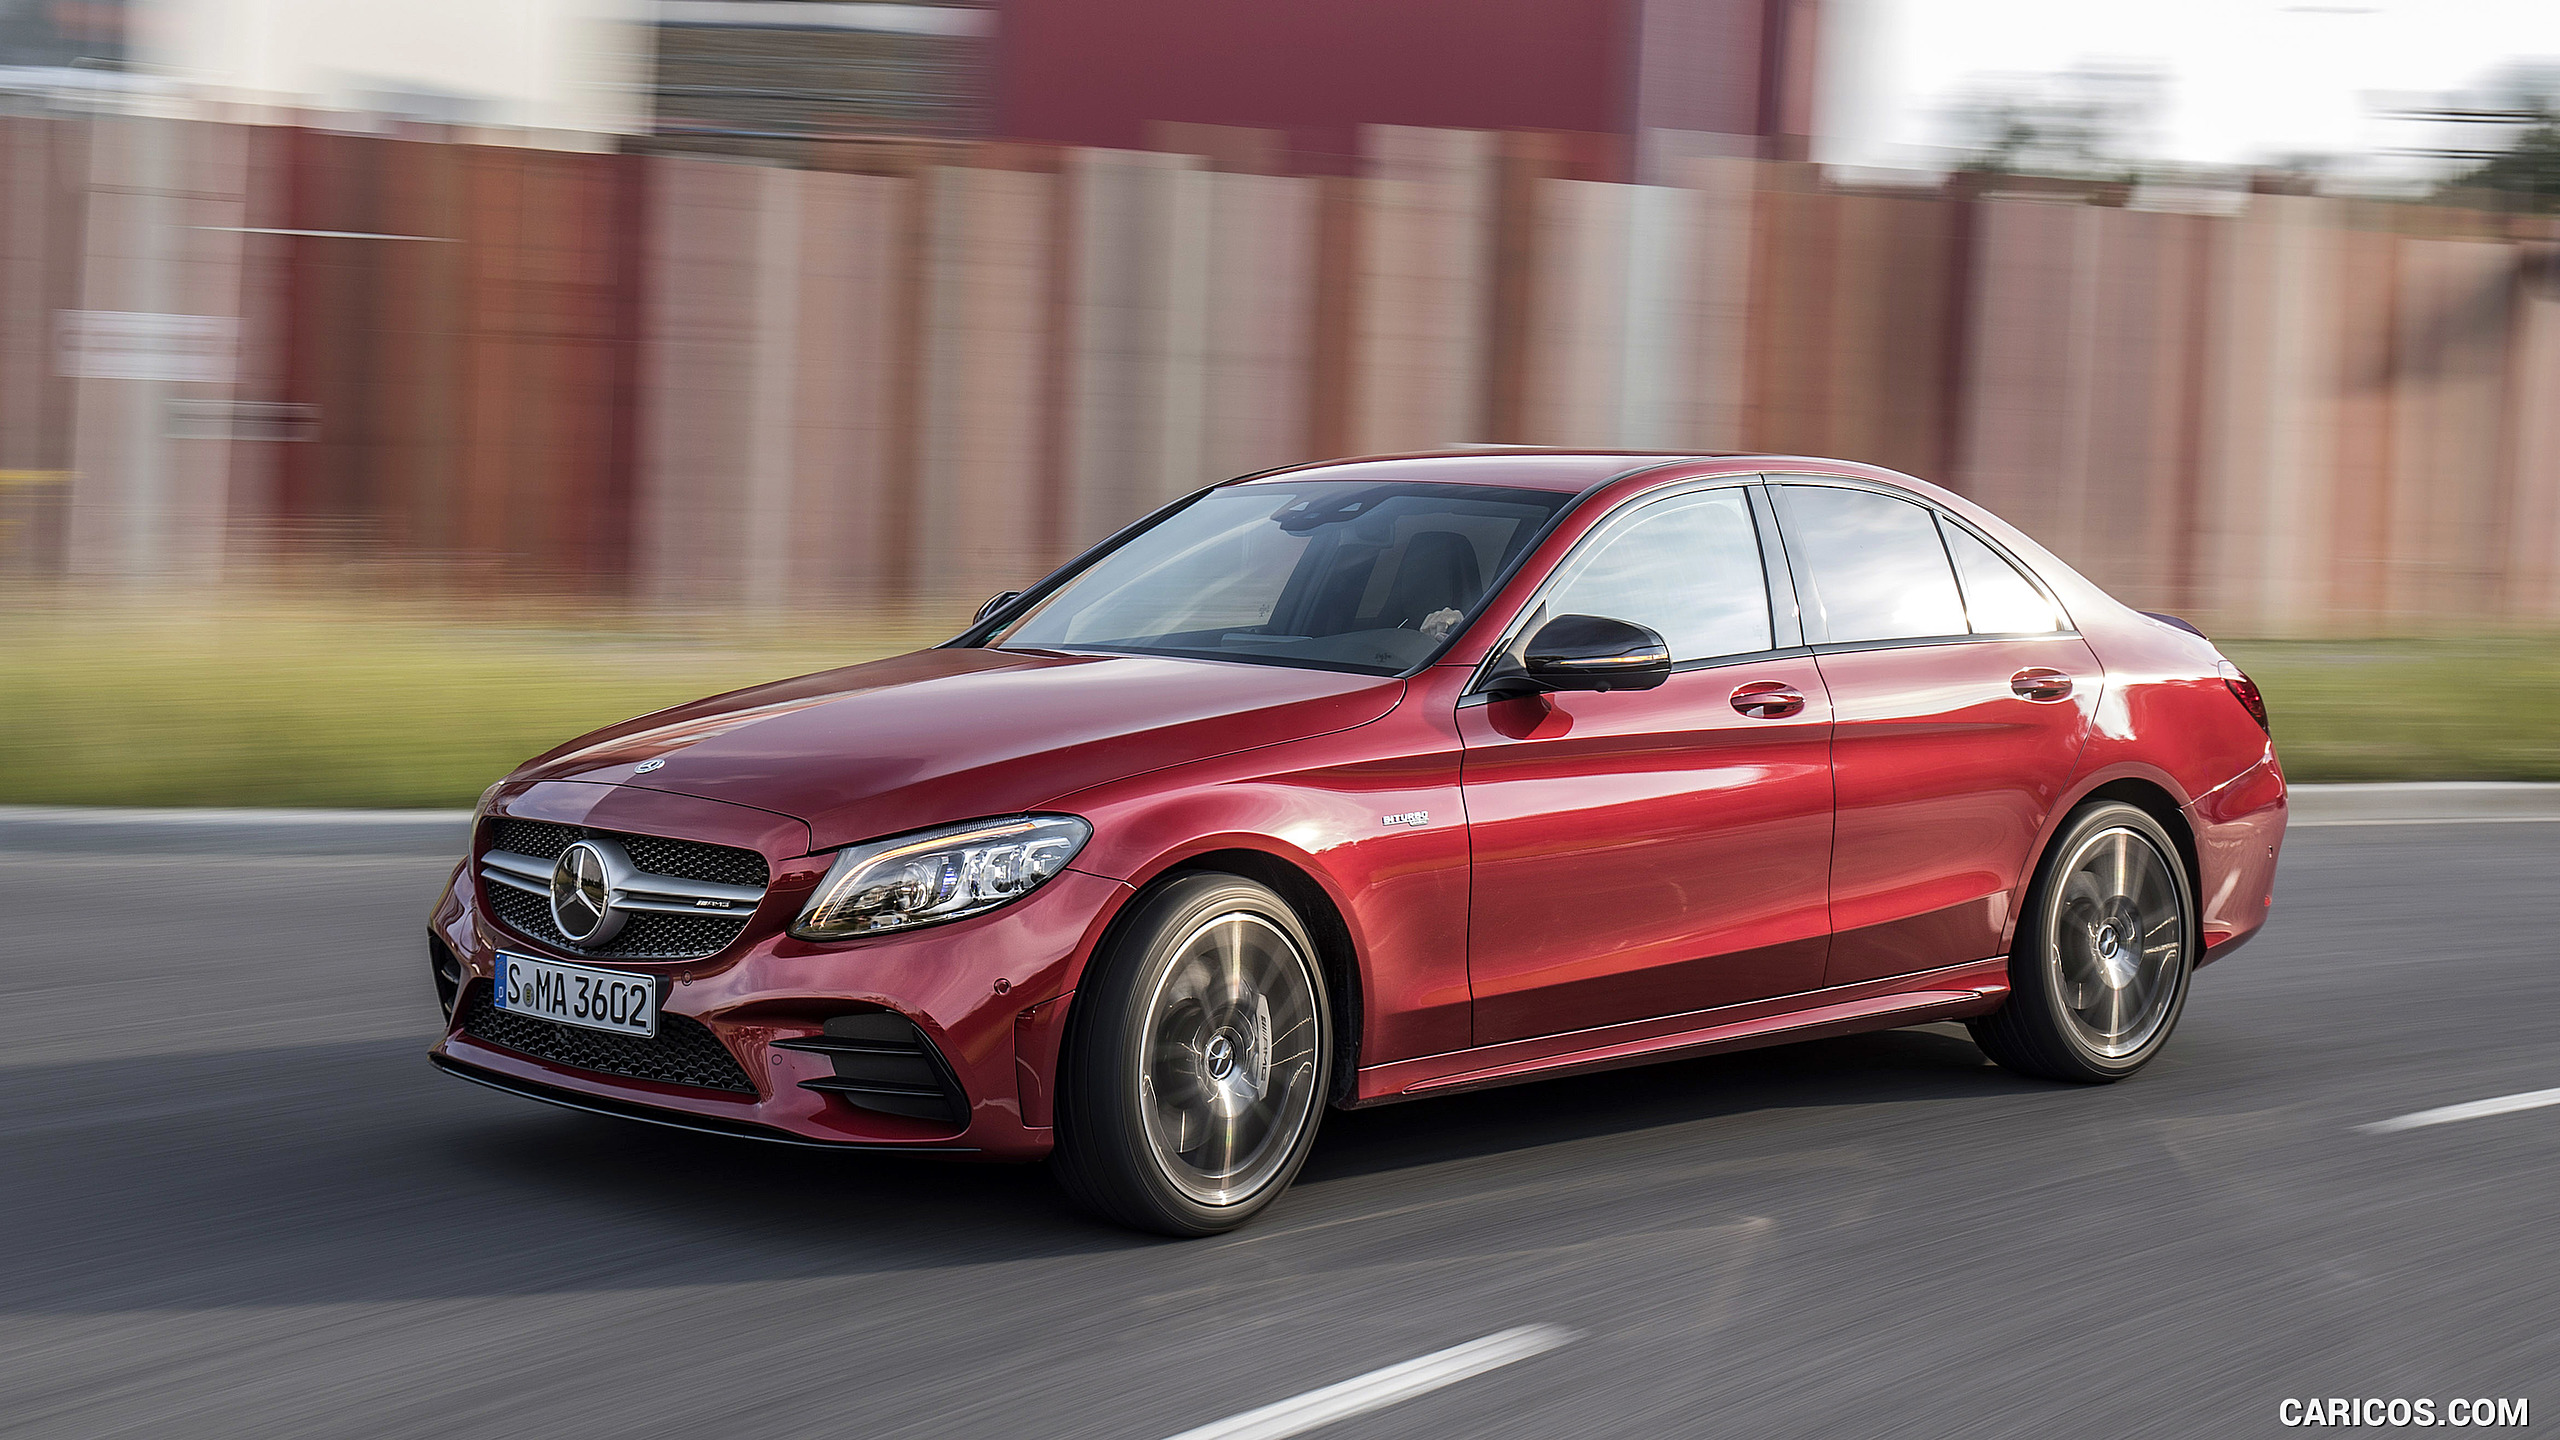 2019 Mercedes-AMG C43 4MATIC Sedan (Color: Hyacinth Red) - Front Three-Quarter, #42 of 192